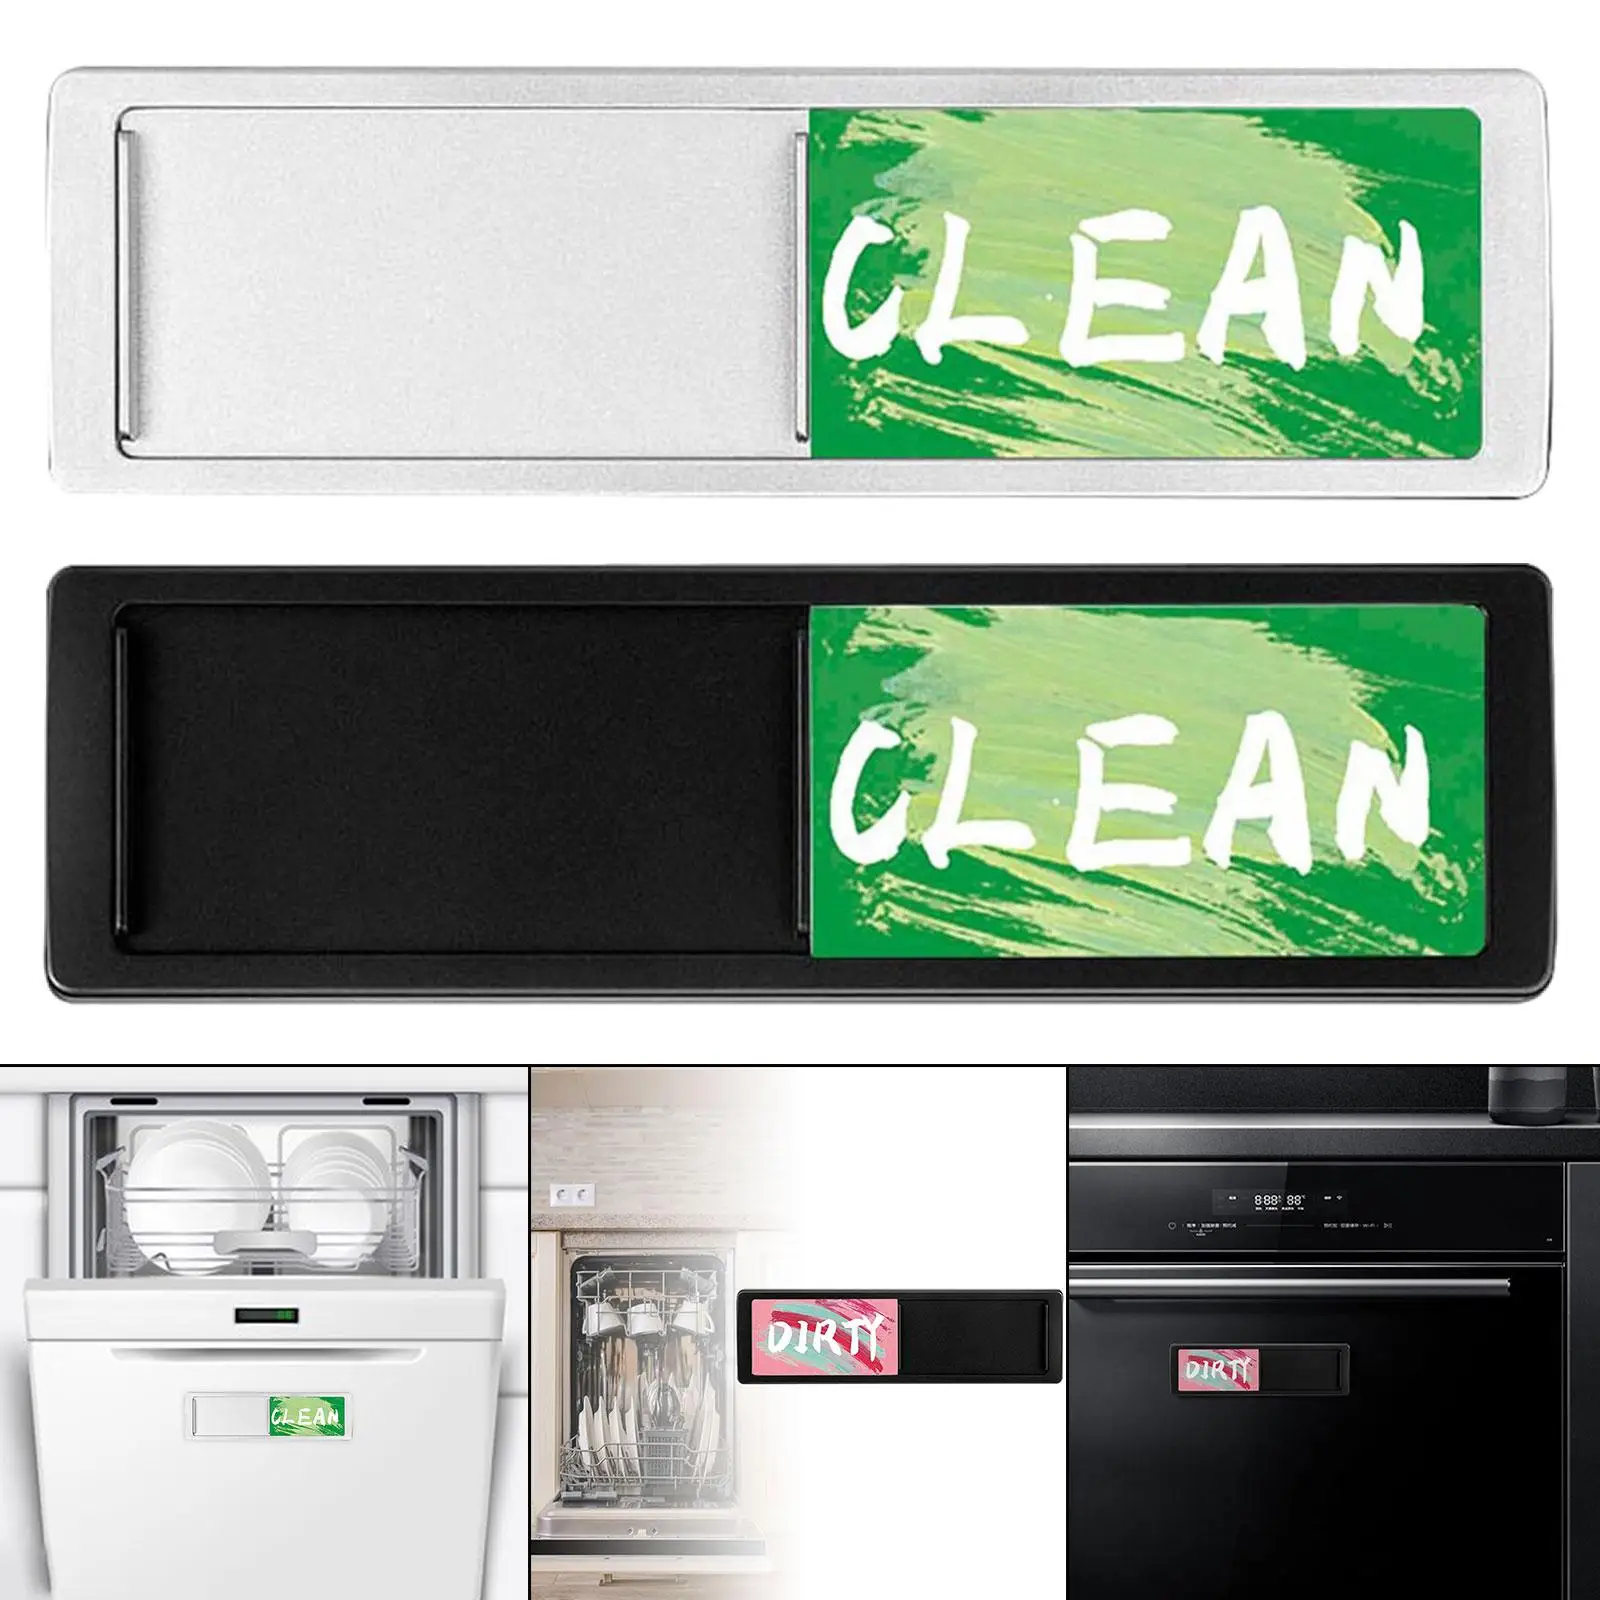 Double Sided Dishwasher Clean Dirty Sign Indicator Durable Dishwasher Cleaning Indicator for Fridge Laundry Washing Machine